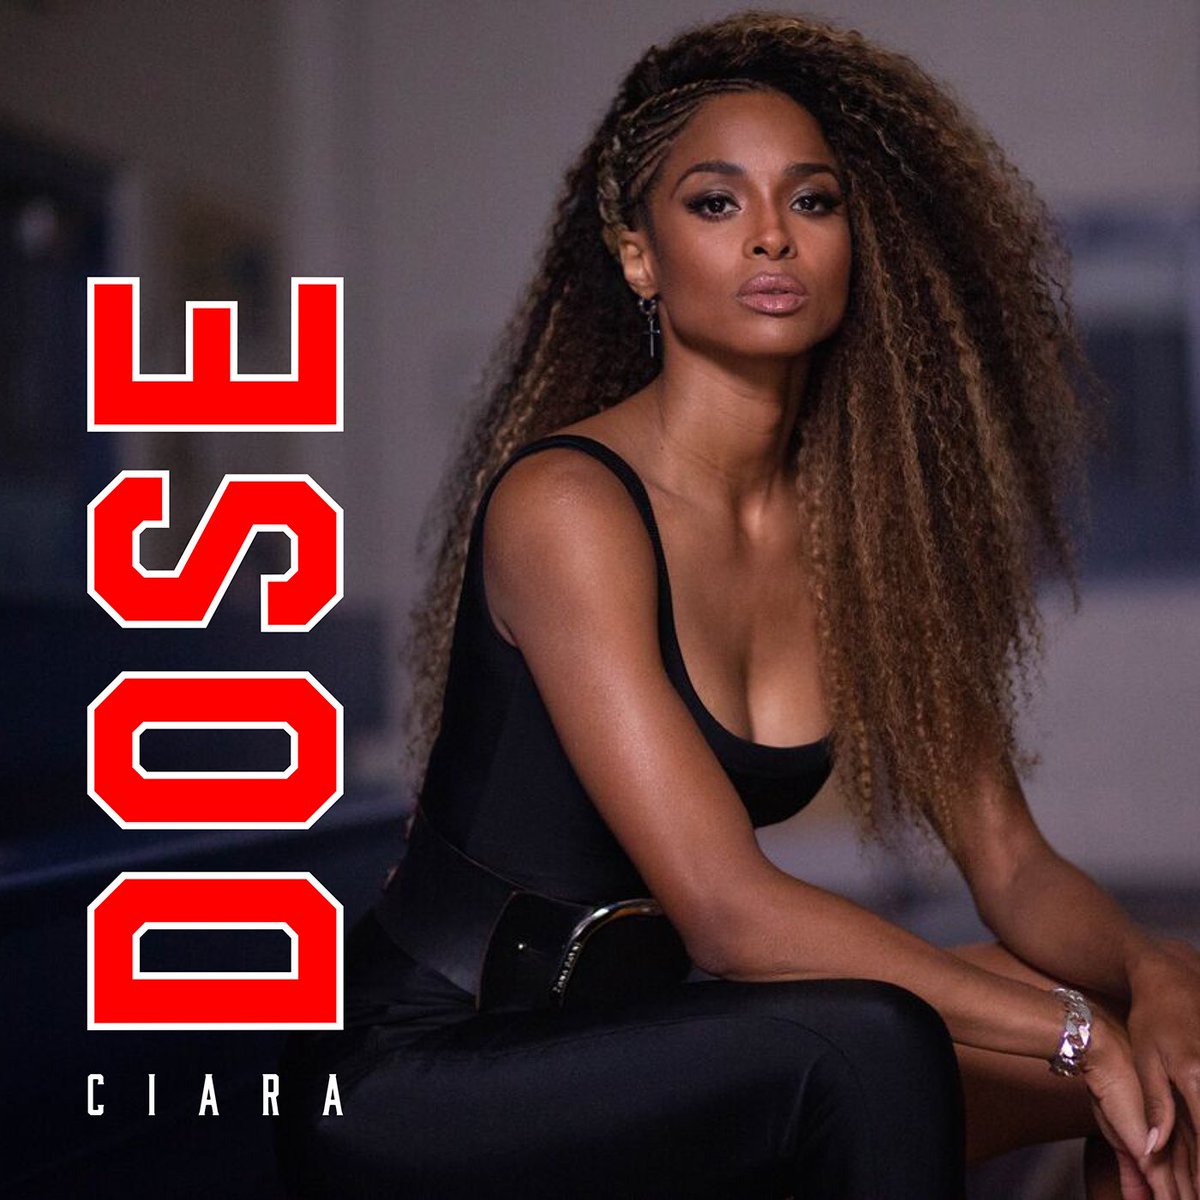 New Single #Dose out 9/14!! Tune into ESPN All Day, Everyday to hear a snippet! I’m soooo excited! ???????? https://t.co/RwhoPOh3R7